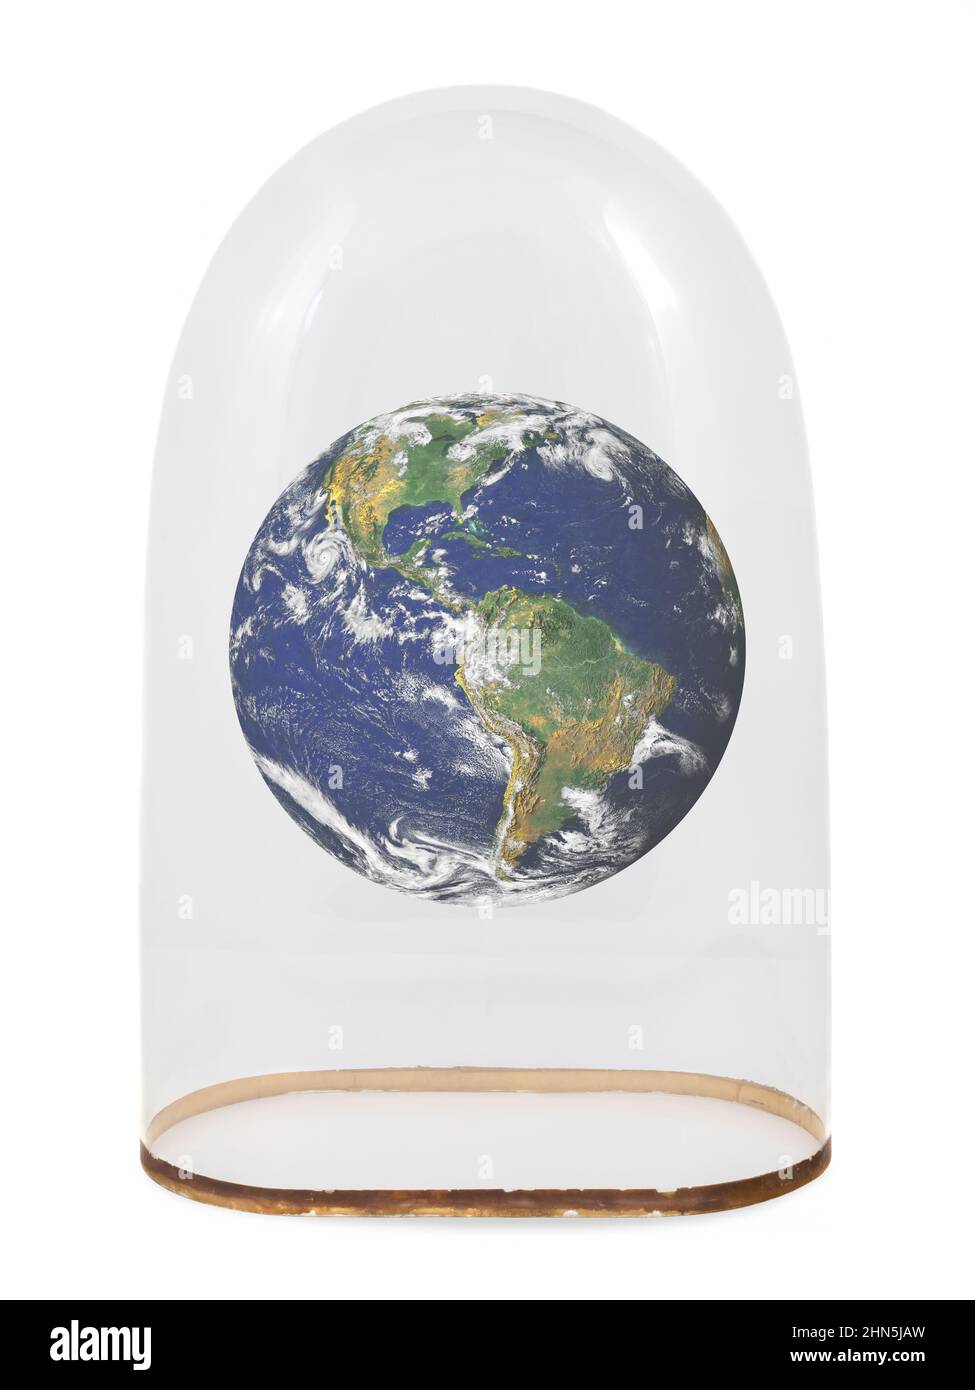 Vintage glass bell jar protecting the planet earth isolated on a white background. Contains imagery furnished by NASA Stock Photo